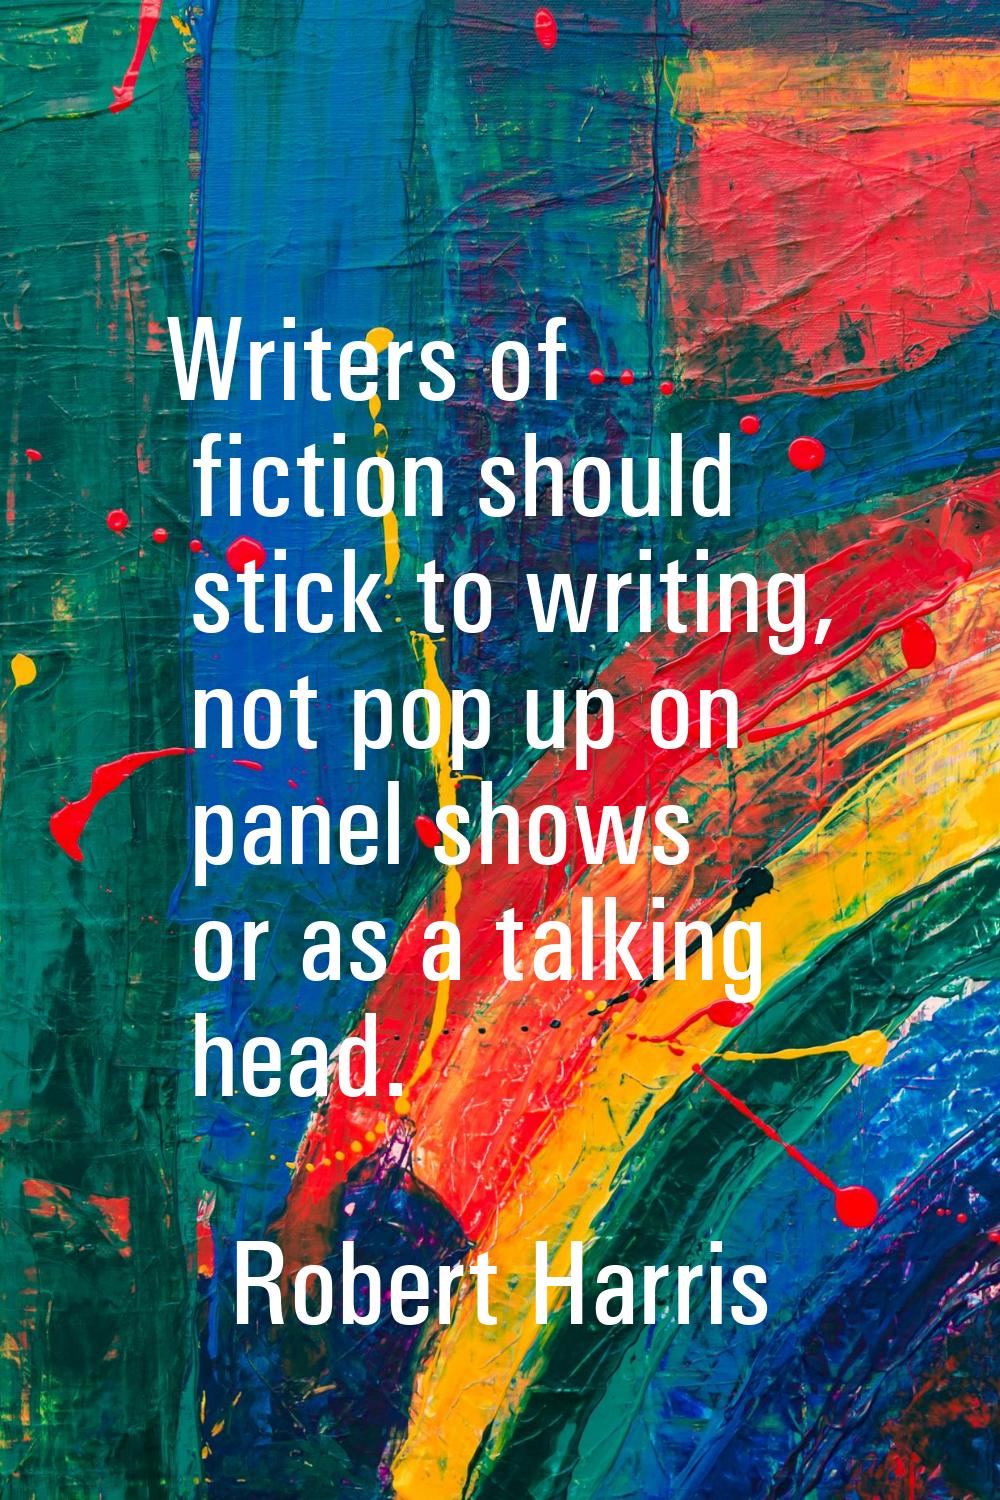 Writers of fiction should stick to writing, not pop up on panel shows or as a talking head.